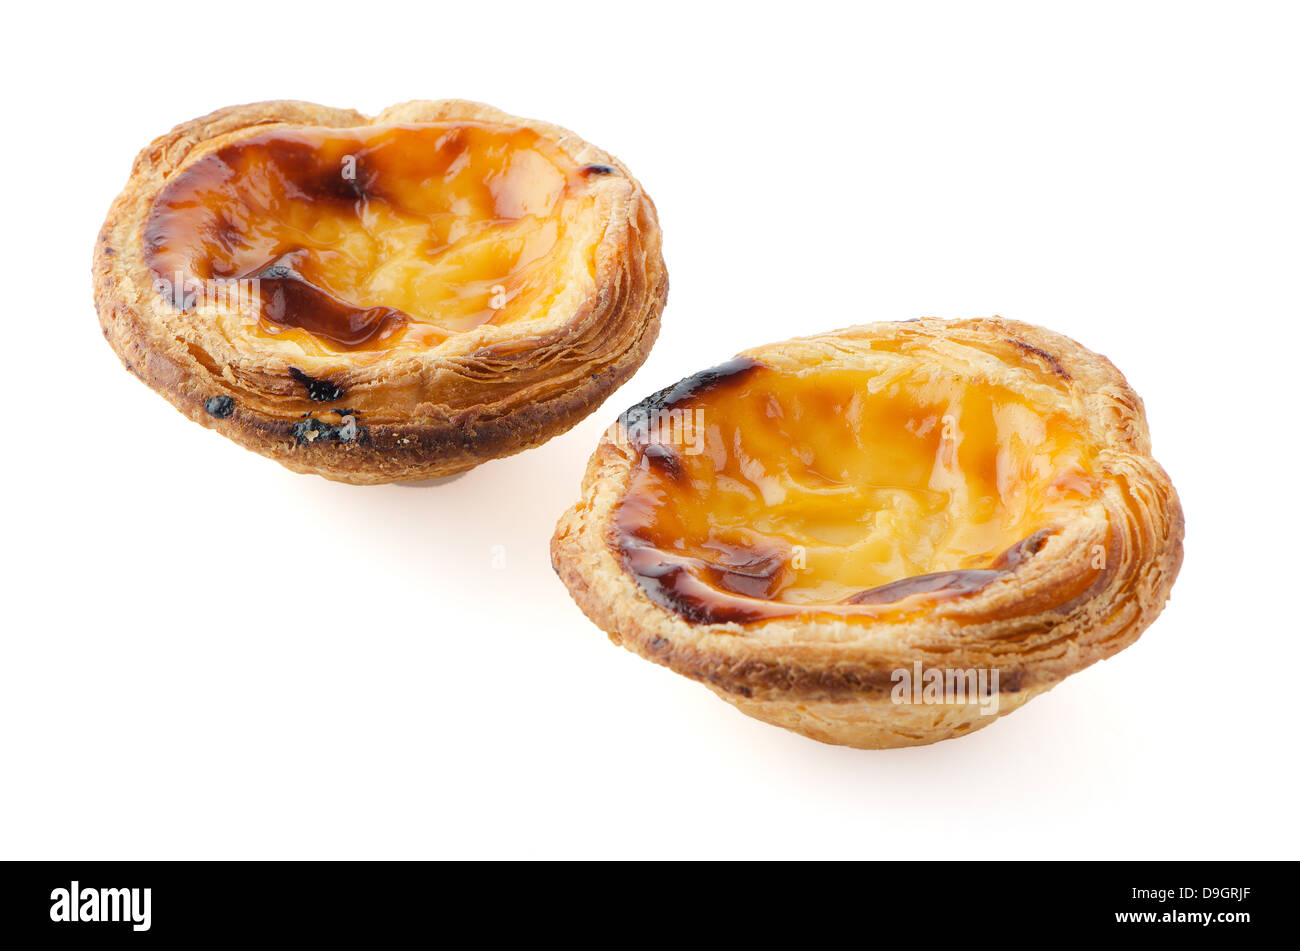 Pasteis de nata, typical pastry from Lisbon - Portugal, isolated on white background. Stock Photo